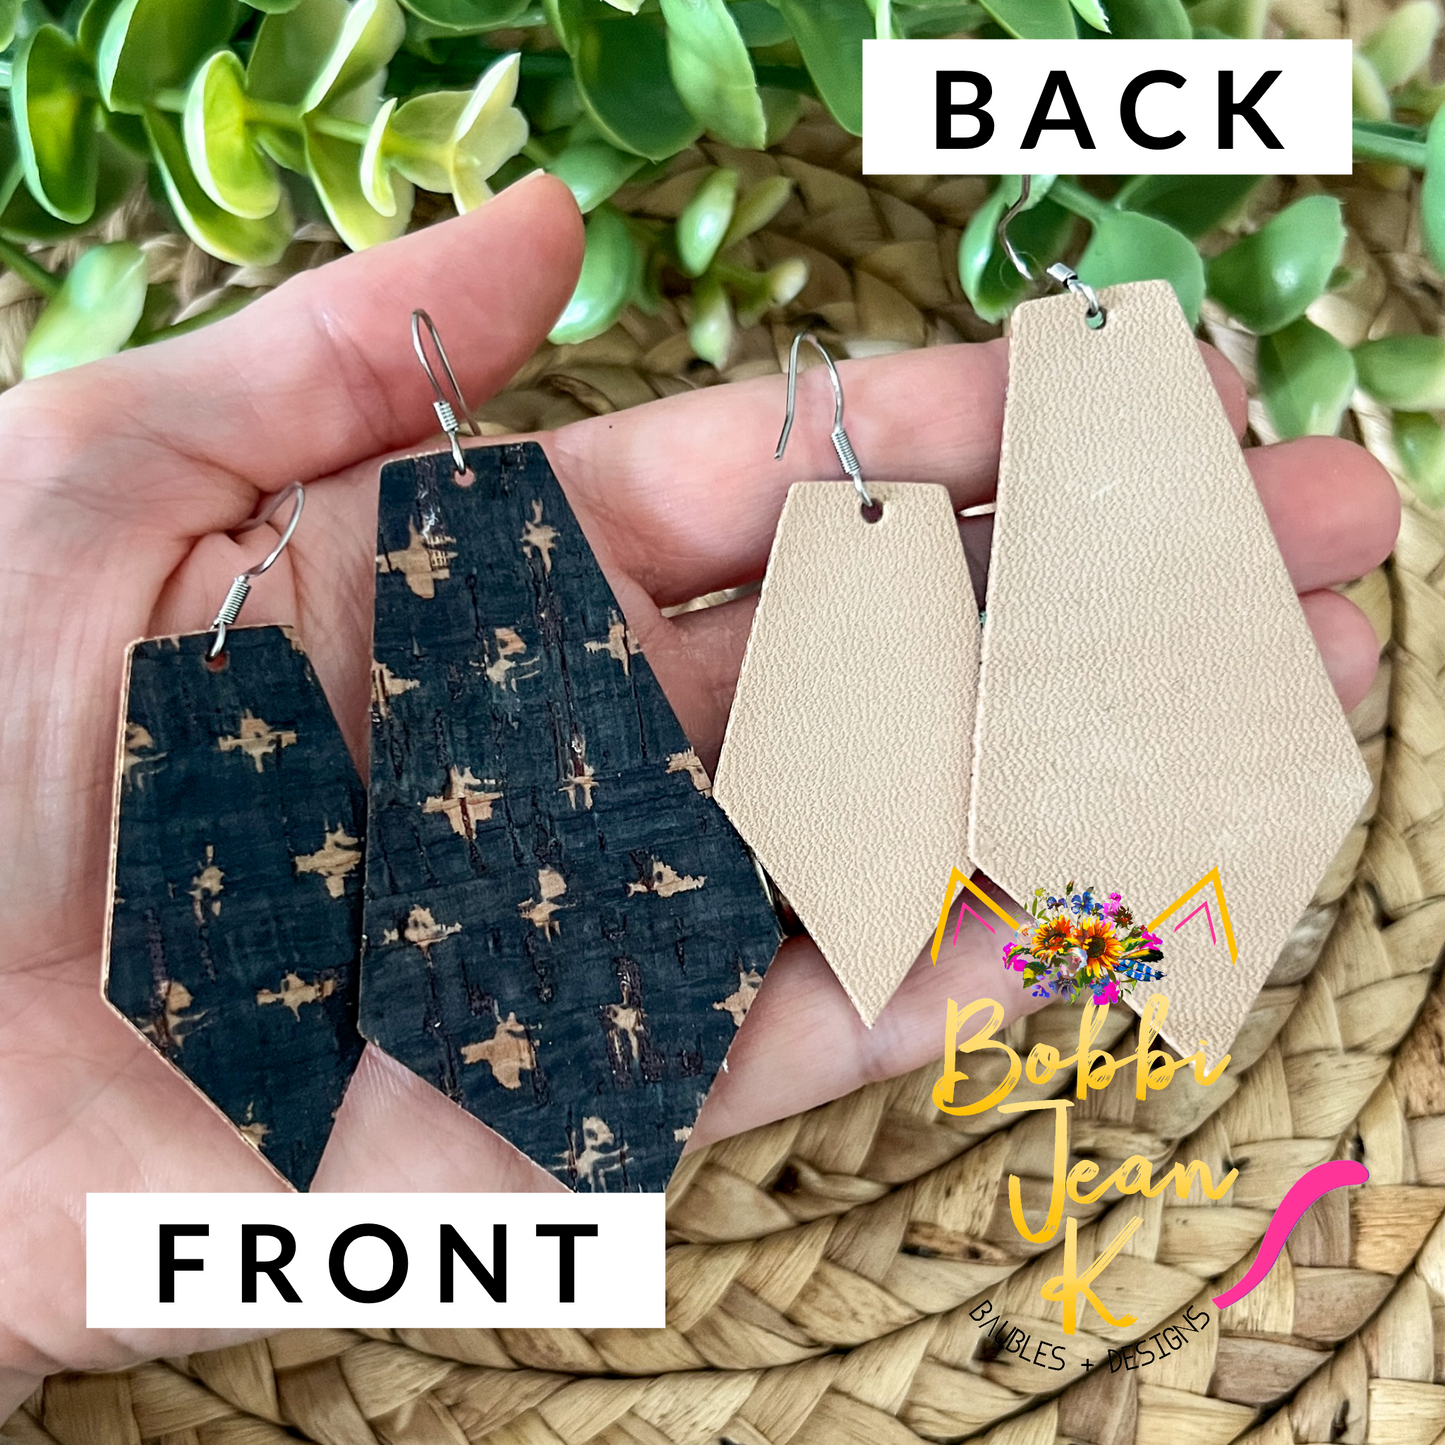 Dark Navy Splash Cork on Leather Pointed Pentagon Earrings: Choose From 2 Sizes - LAST CHANCE